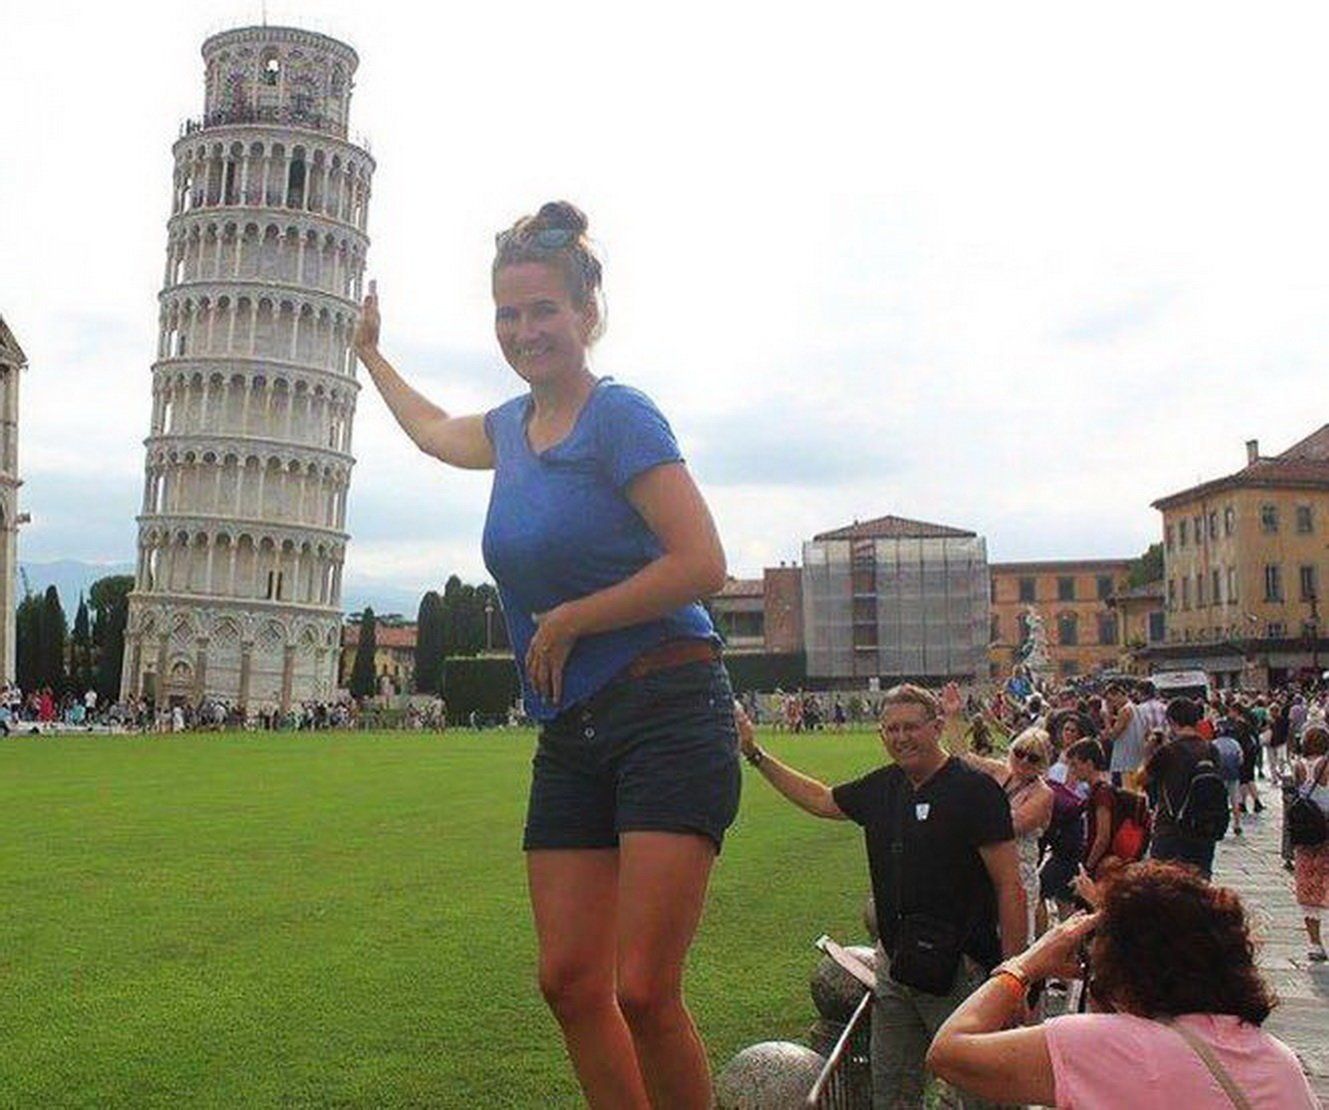 When to come to Pisa in Italy, don't forget to take a proper photo